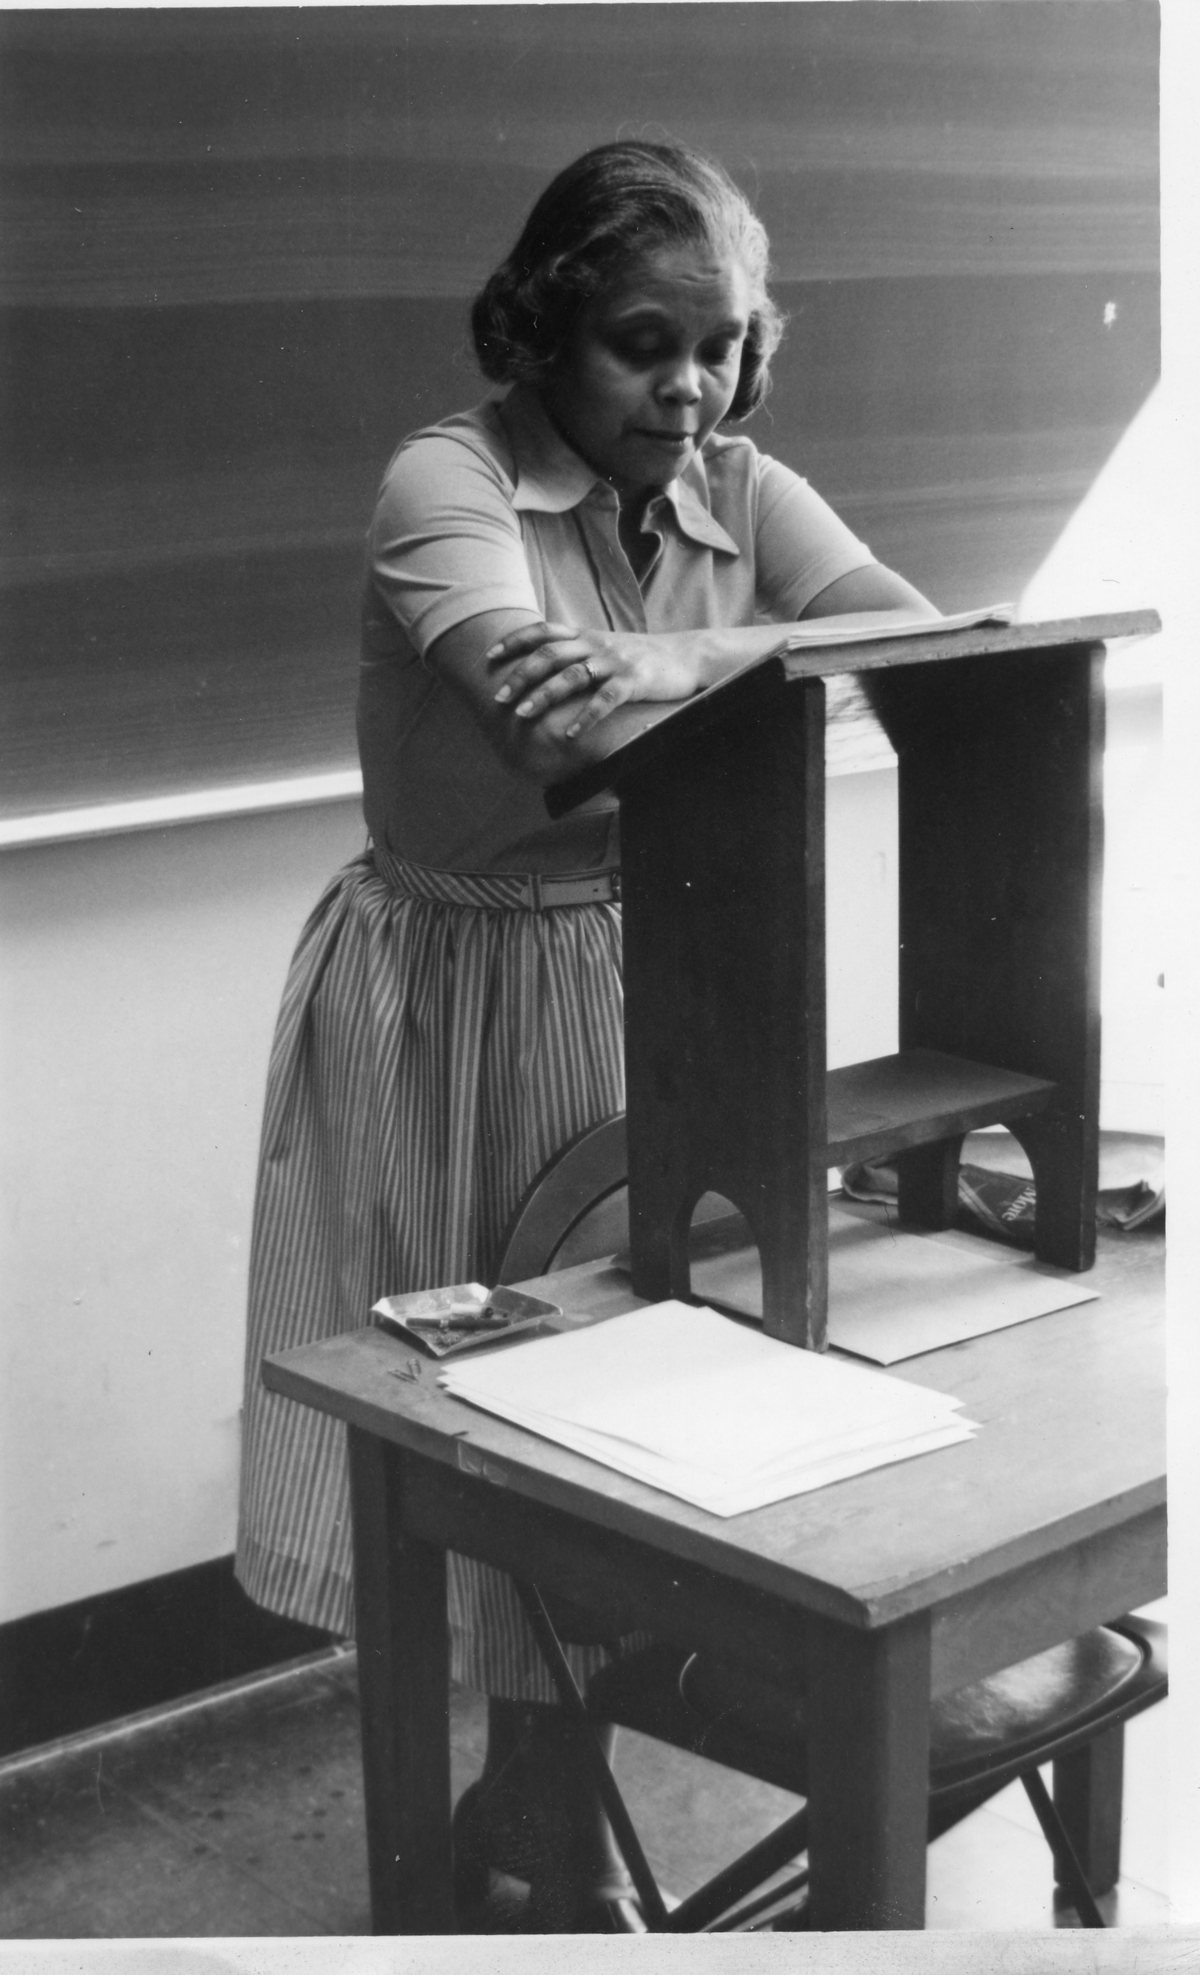 A black and white photo from the 1960s or 1970s of a woman ready to give a panel speech